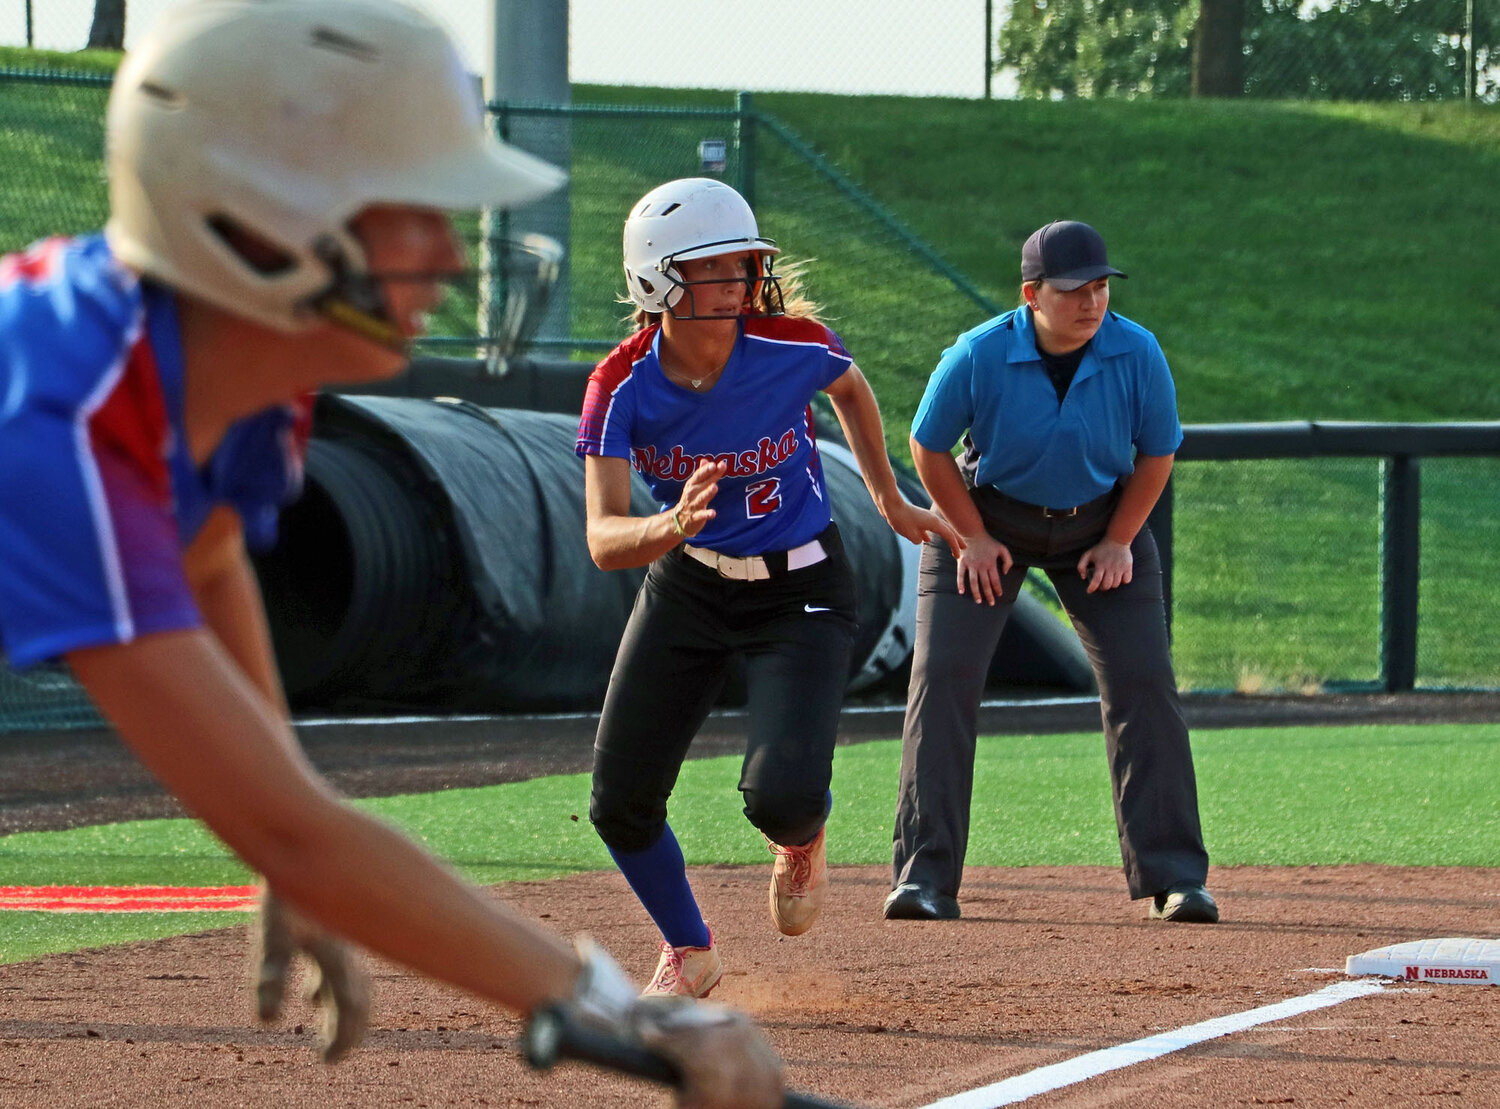 Leah Chance of Blair, middle, races home Monday during the Nebraska Coaches Association All-Star Game at Bowlin Stadium in Lincoln. The umpire pictured, Jessica Schenck, is a Blair graduate as well.